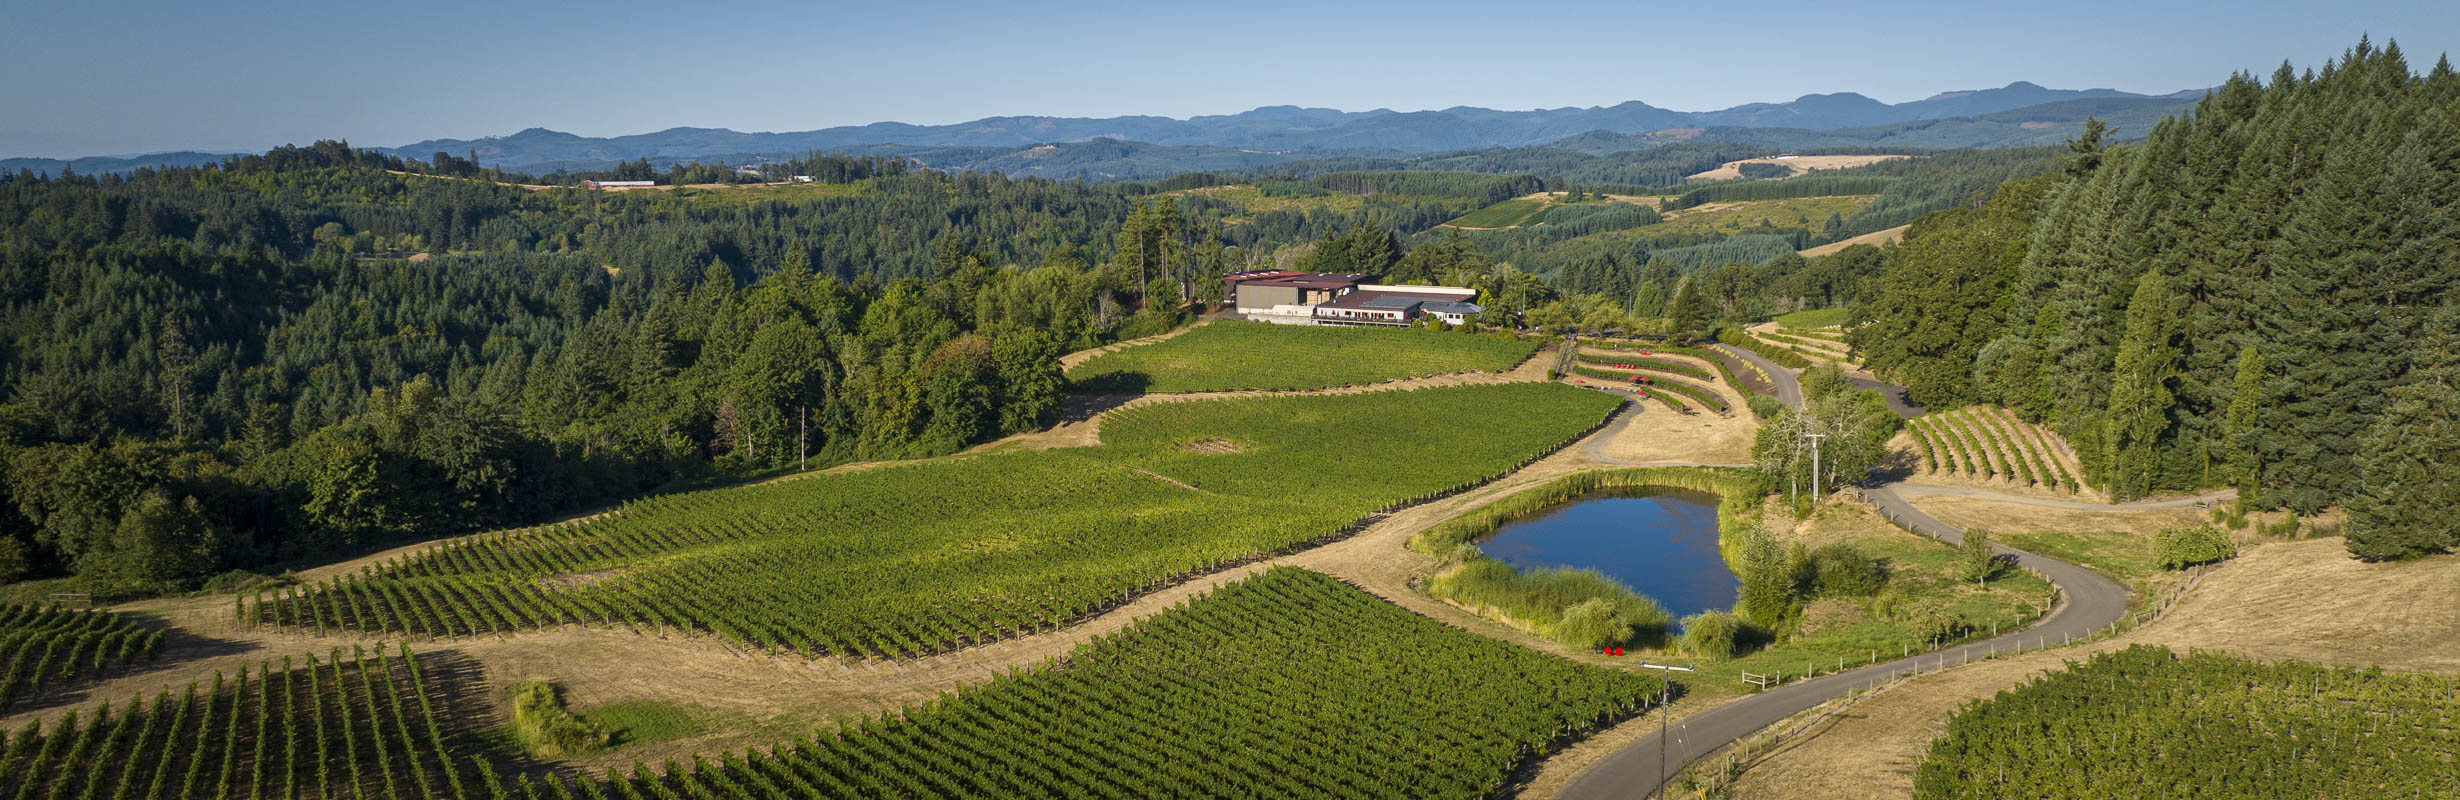 aerial view of vineyards surrounded by conifers with a blue sky reflected in a pond